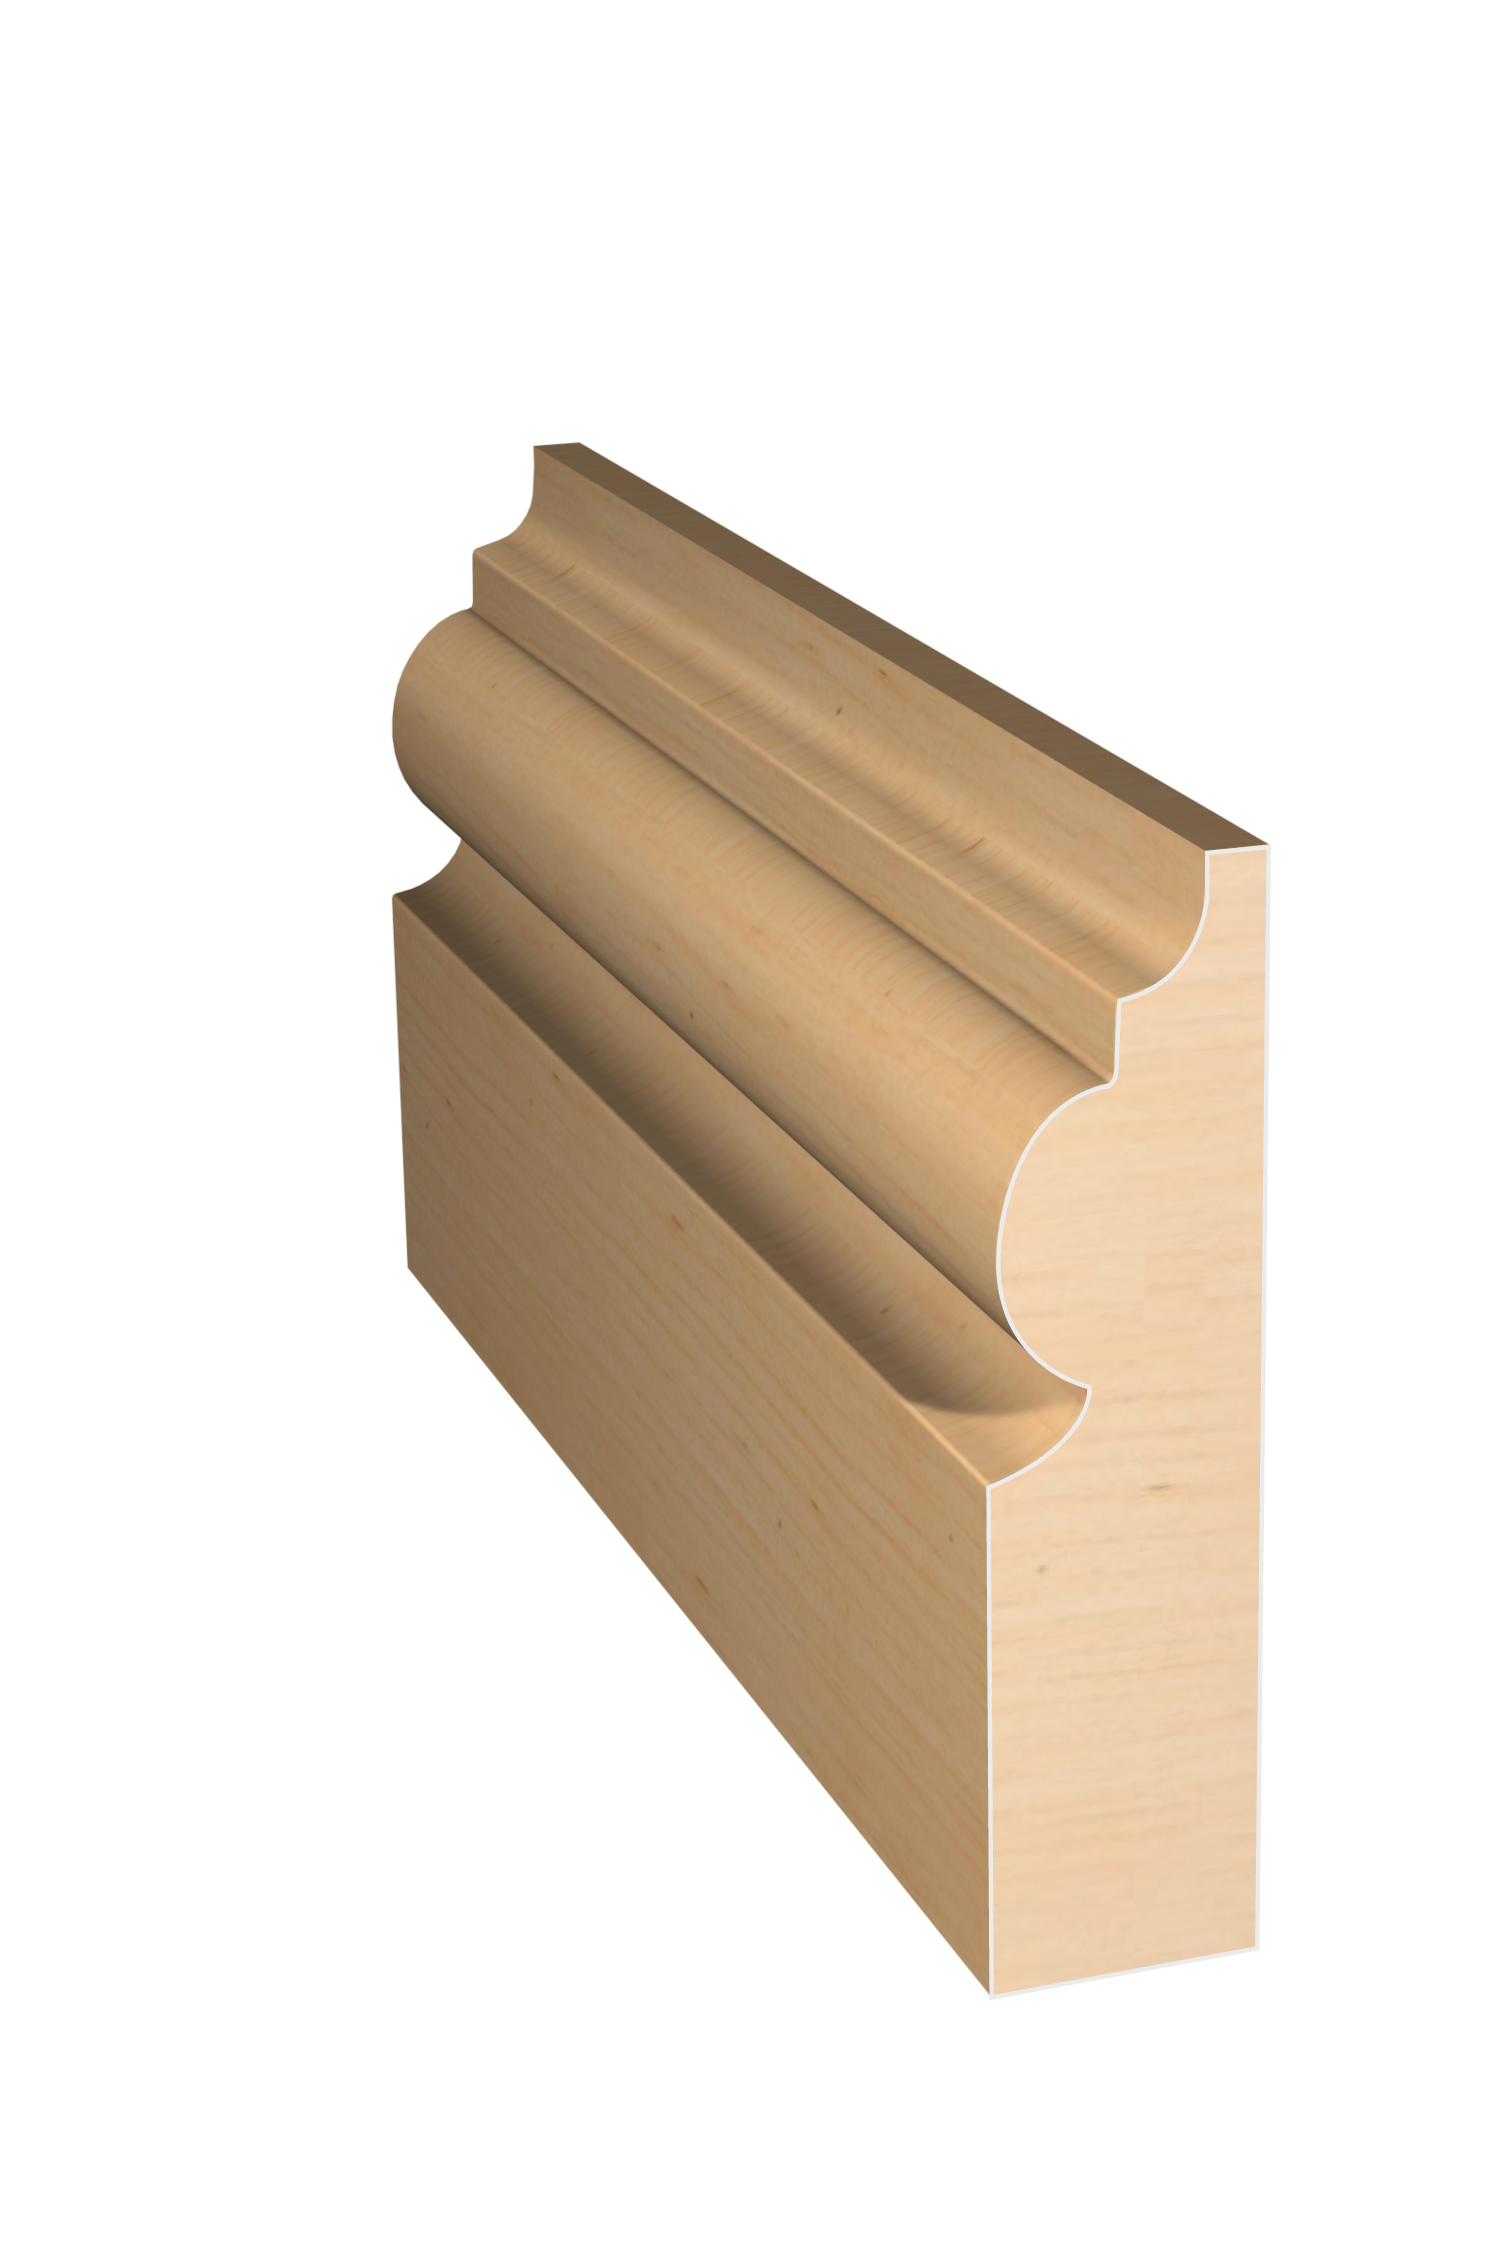 Three dimensional rendering of custom casing wood molding CAPL34 made by Public Lumber Company in Detroit.